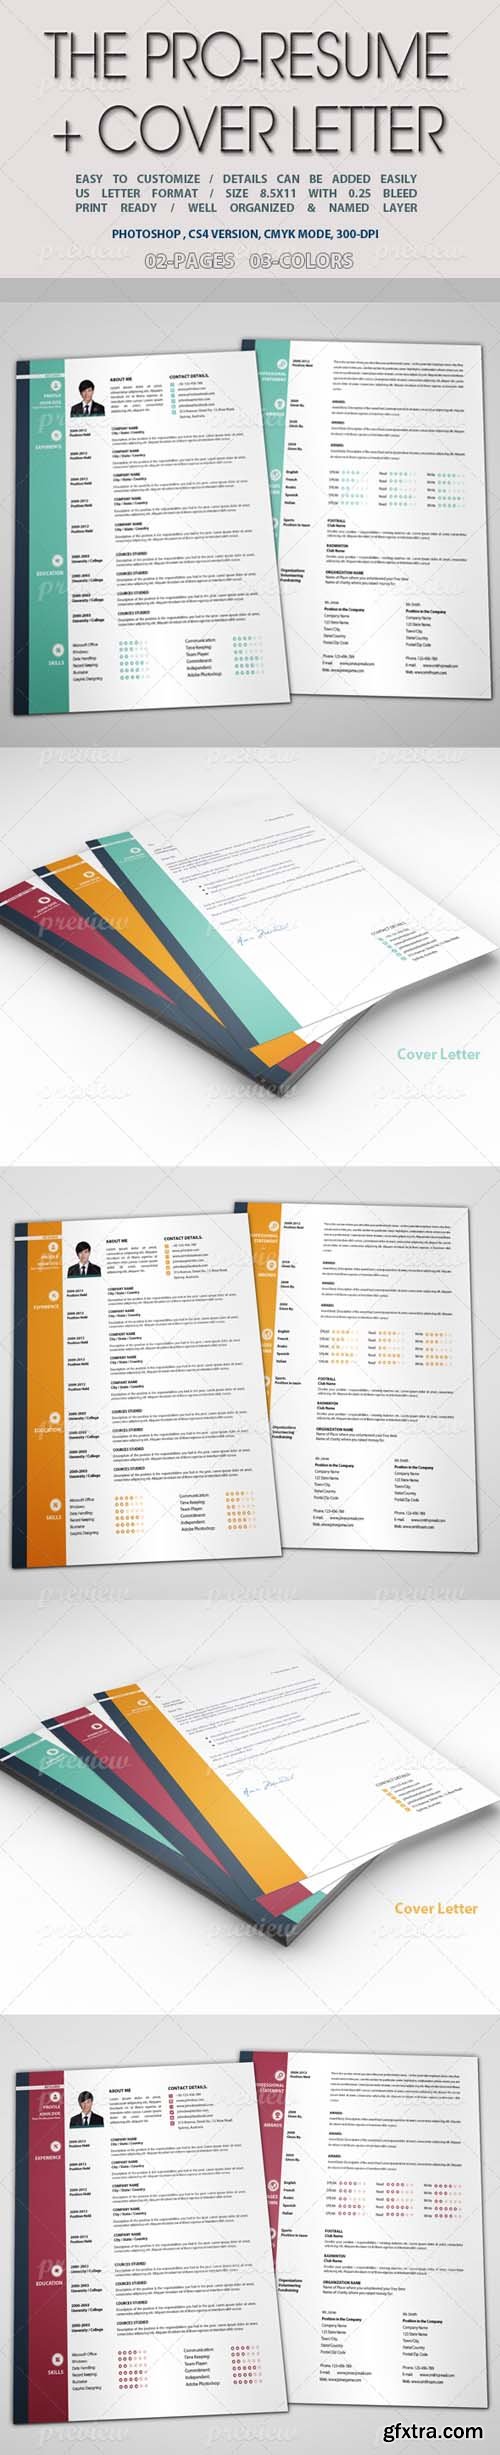 The Pro-Resume + Cover Letter